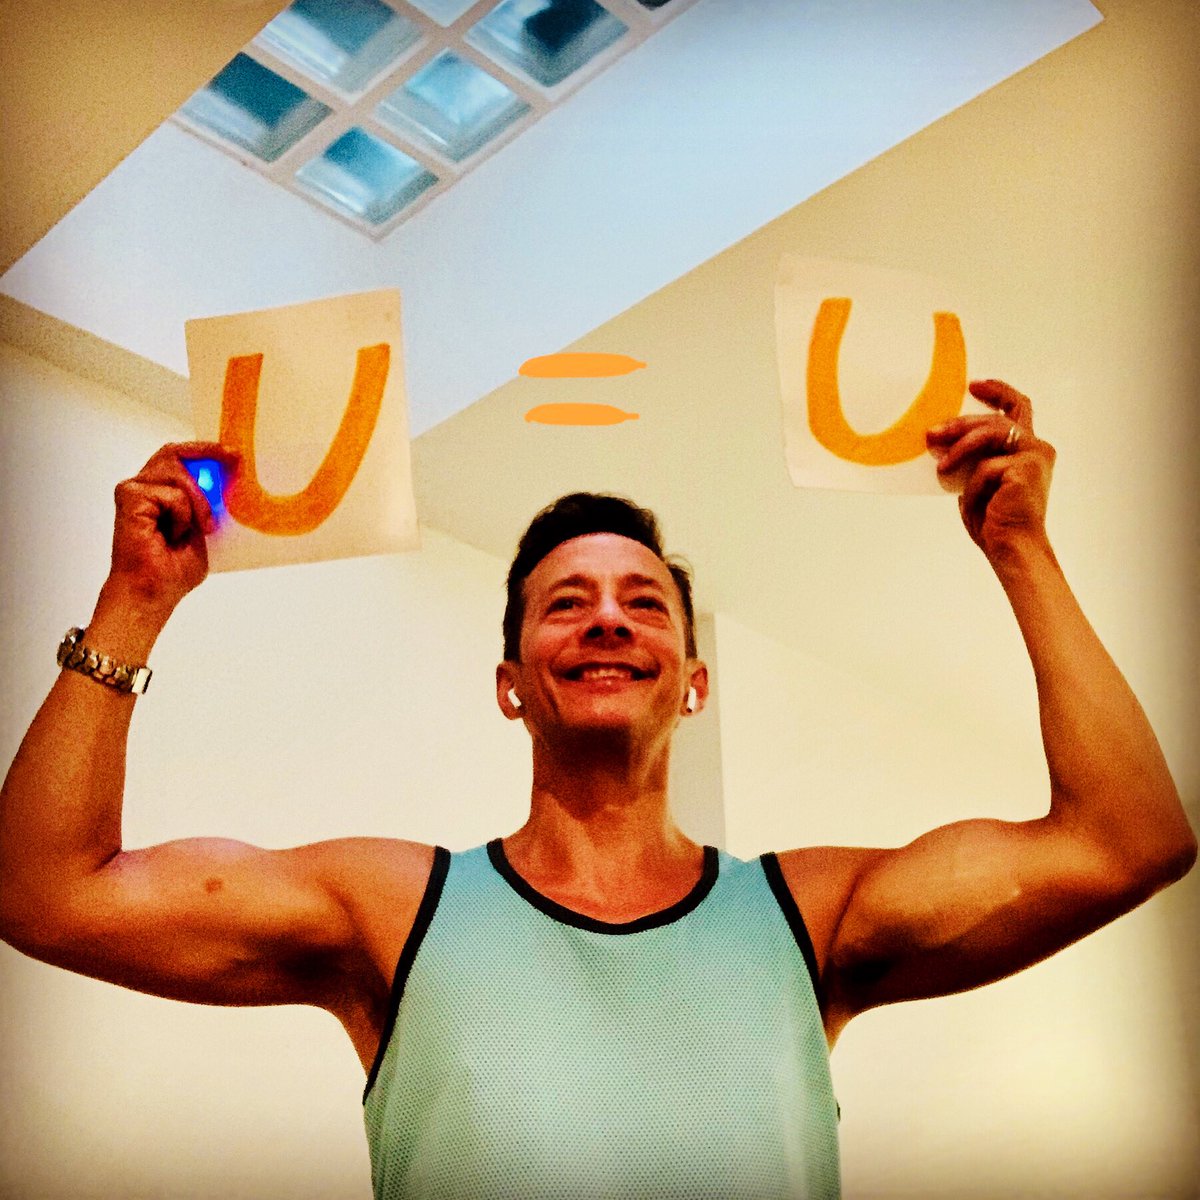 The goal of HIV treatment is to reduce the levels of HIV in the body. When it reaches ‘Undetectable’ levels, there is not enough virus present for sexual transmission - there is ZERO risk!We call this Undetectable means Untransmittable or  #UequalsU. https://www.aidsmap.com/about-hiv/undetectable-viral-load-and-transmission-information-hiv-negative-people